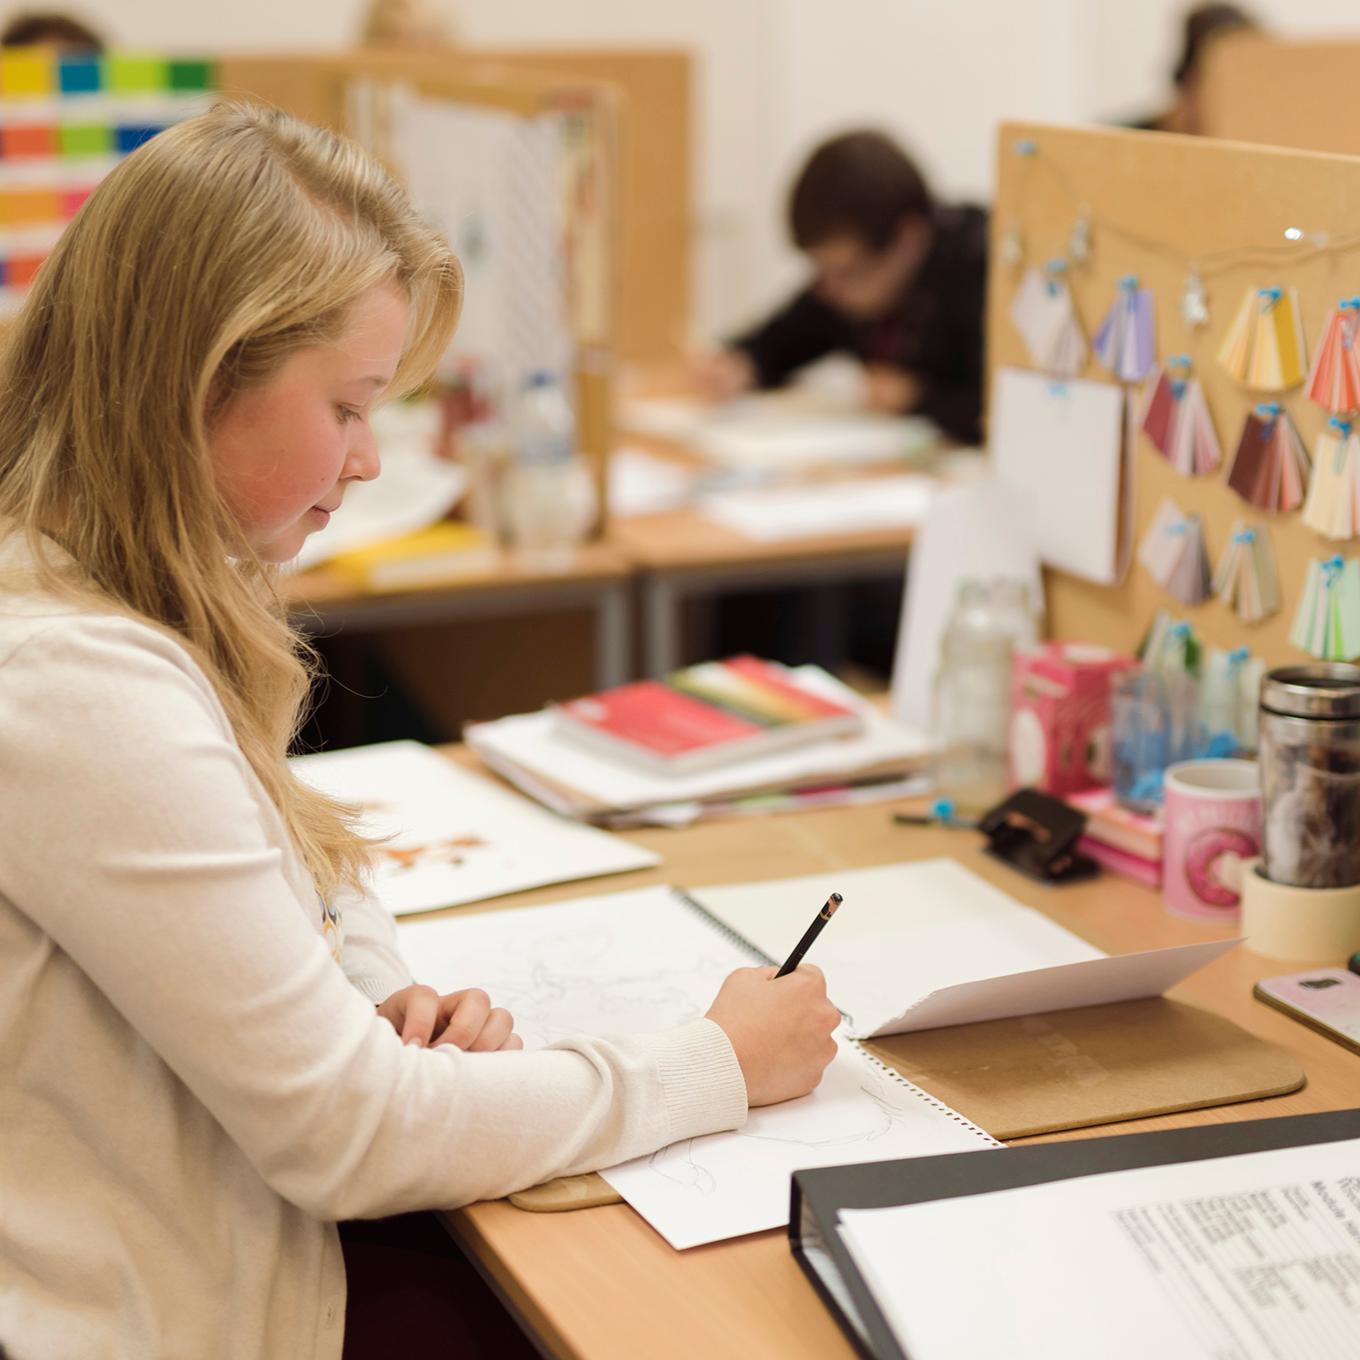 An illustration student works on a project at her workspace